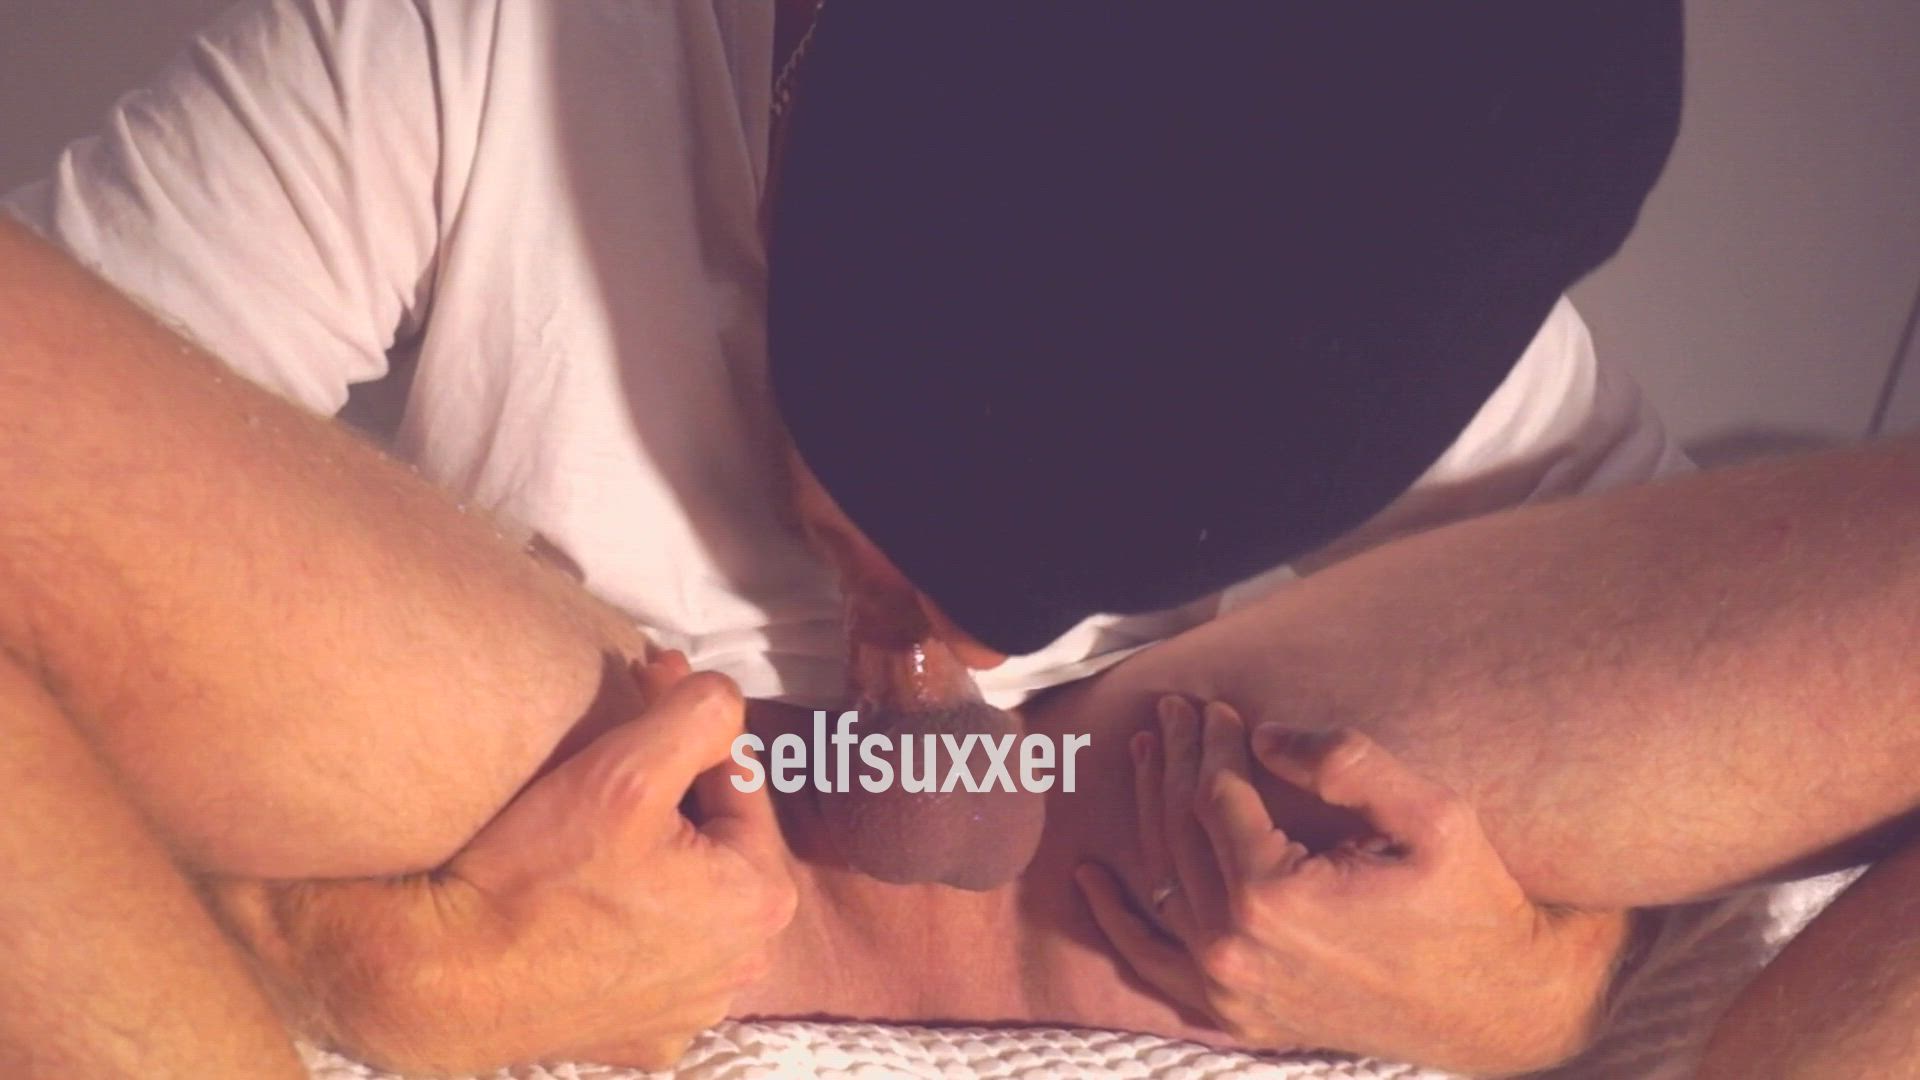 Blowjob porn video with onlyfans model selfsuxxer <strong>@selfsuxxer</strong>